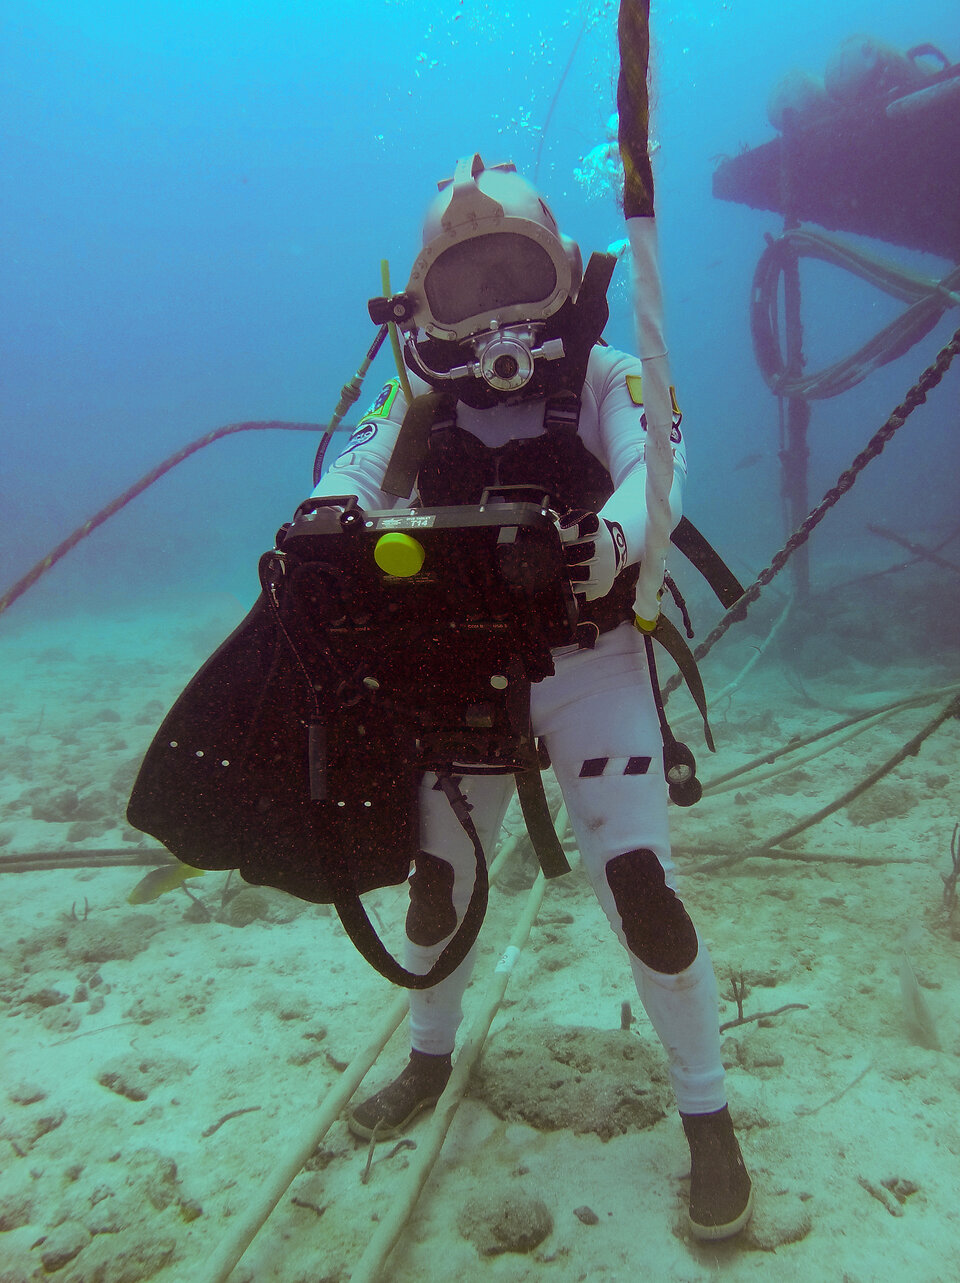 NEEMO 21 crew and support team